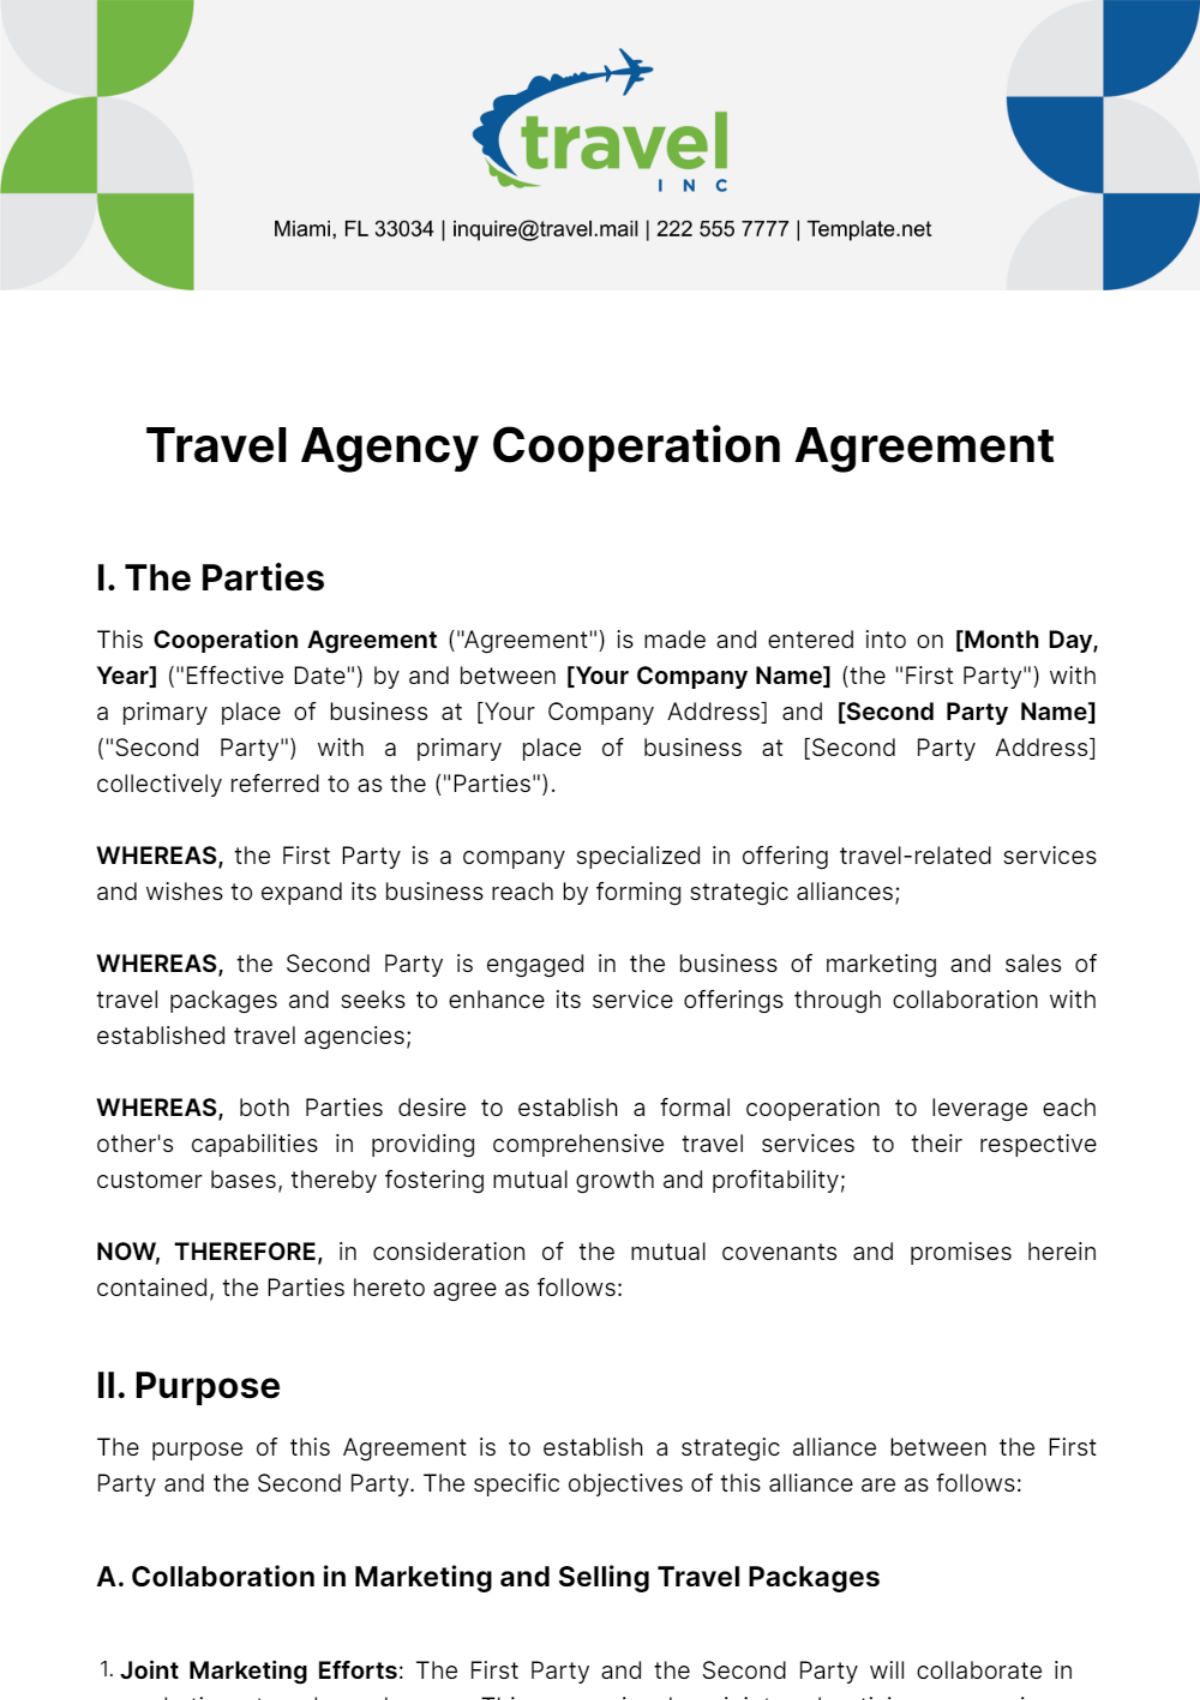 Travel Agency Cooperation Agreement Template